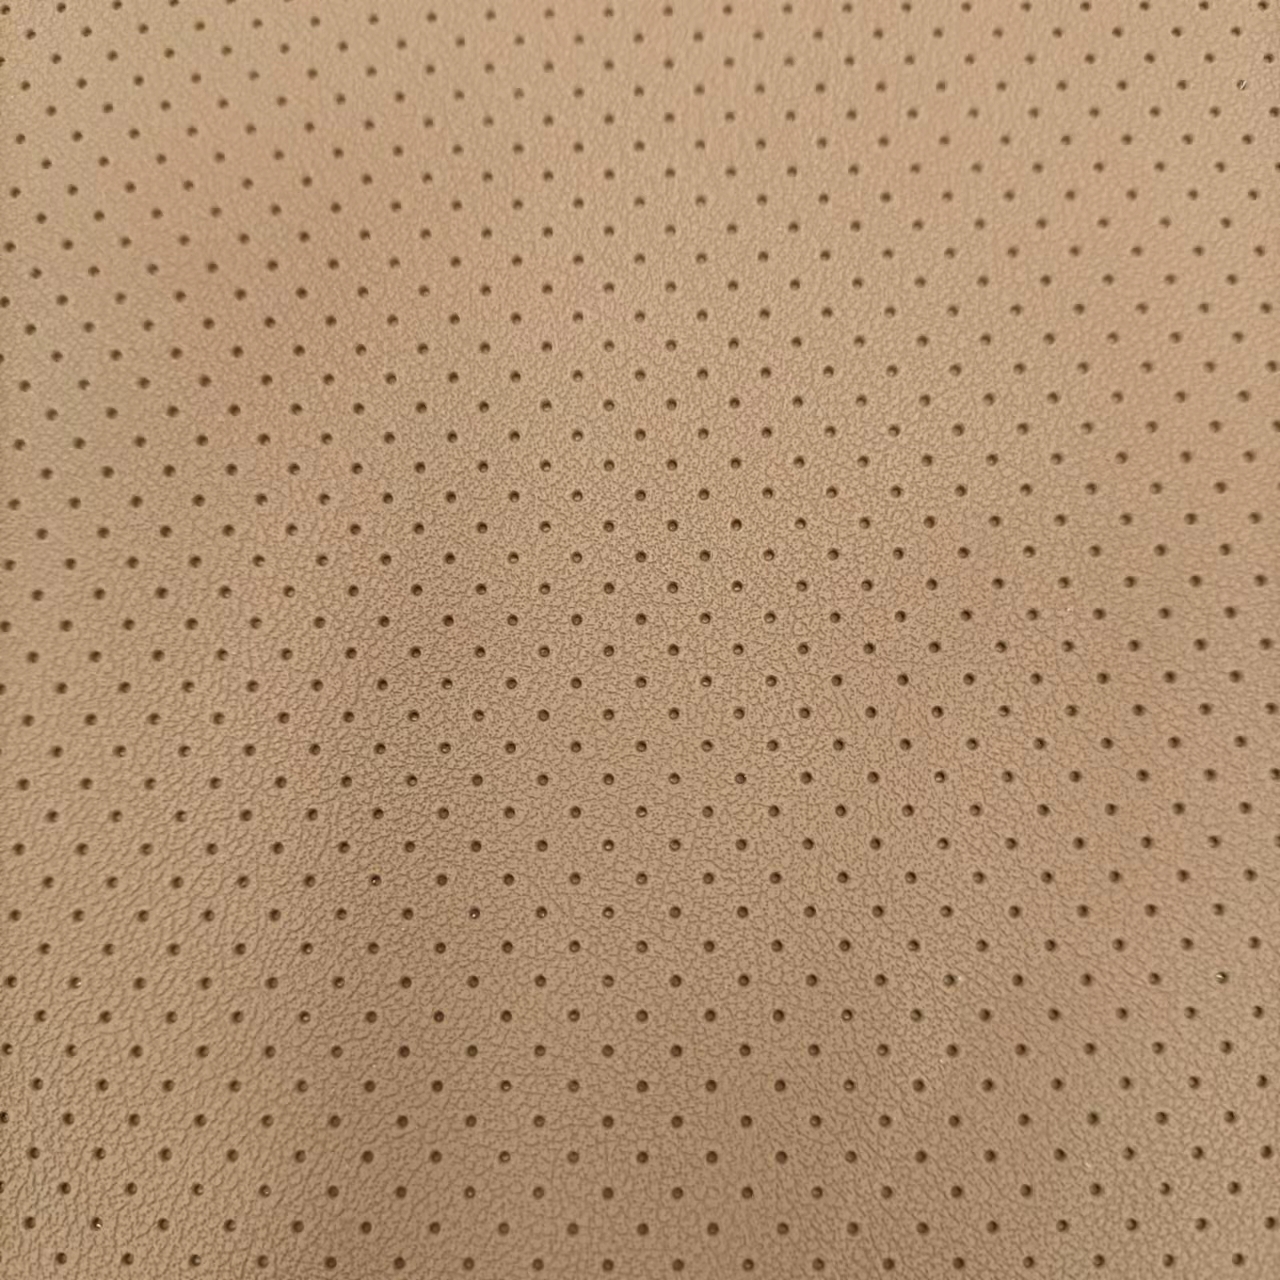 Perforated Automotive car upholstery Good quality car seat leather vegan